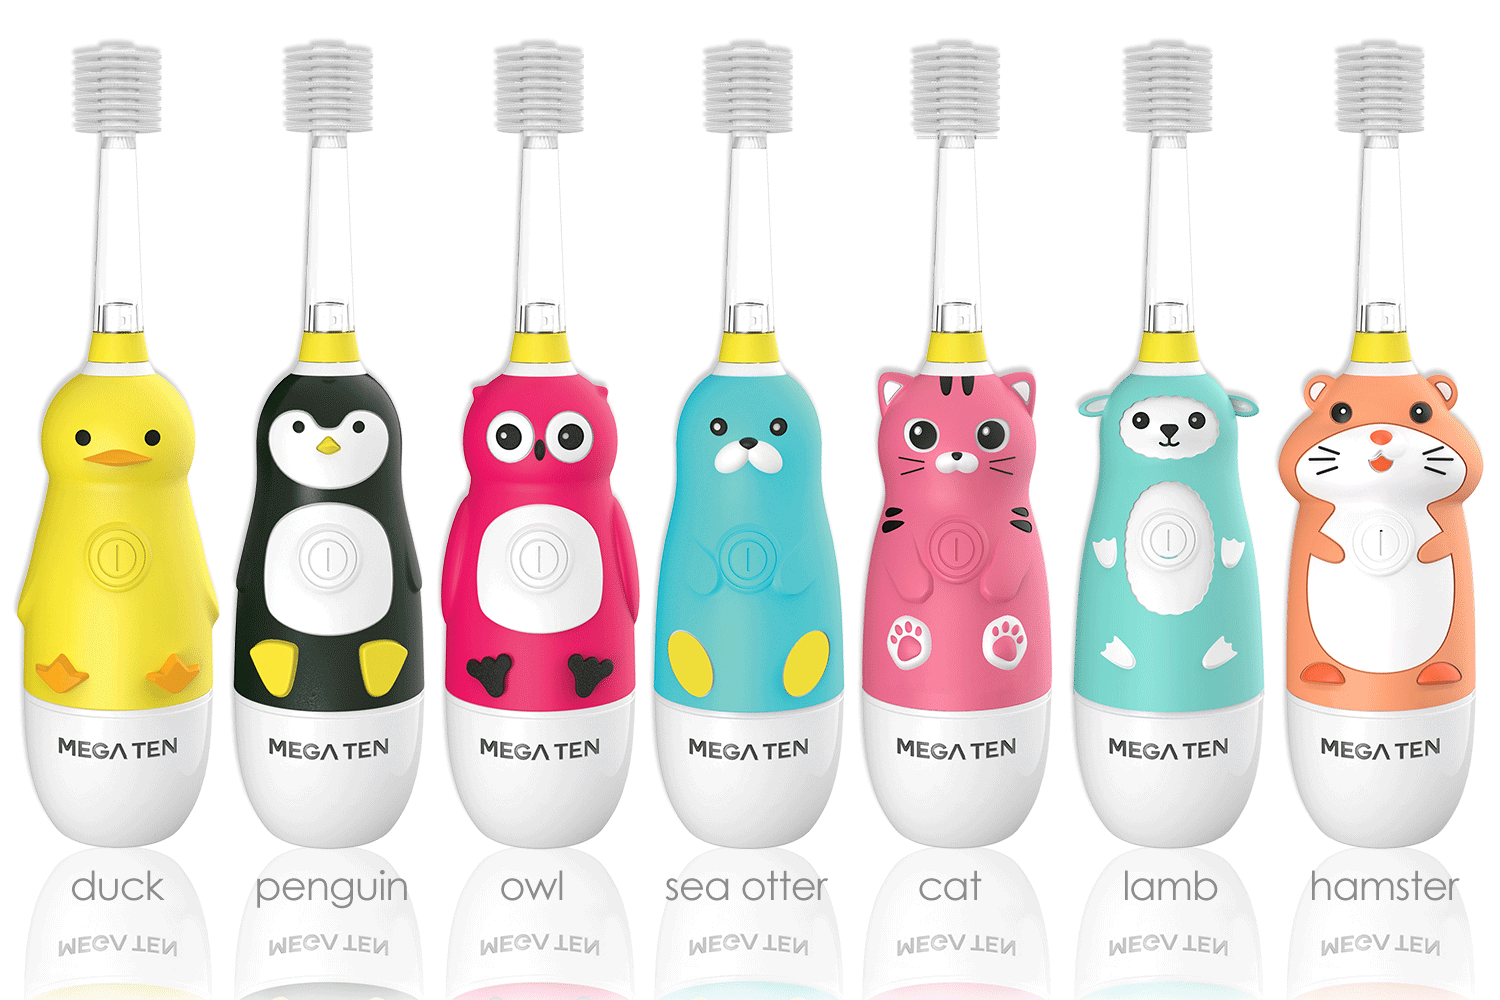 All about Mega Ten Animal Character Sonic Toothbrush for Kids